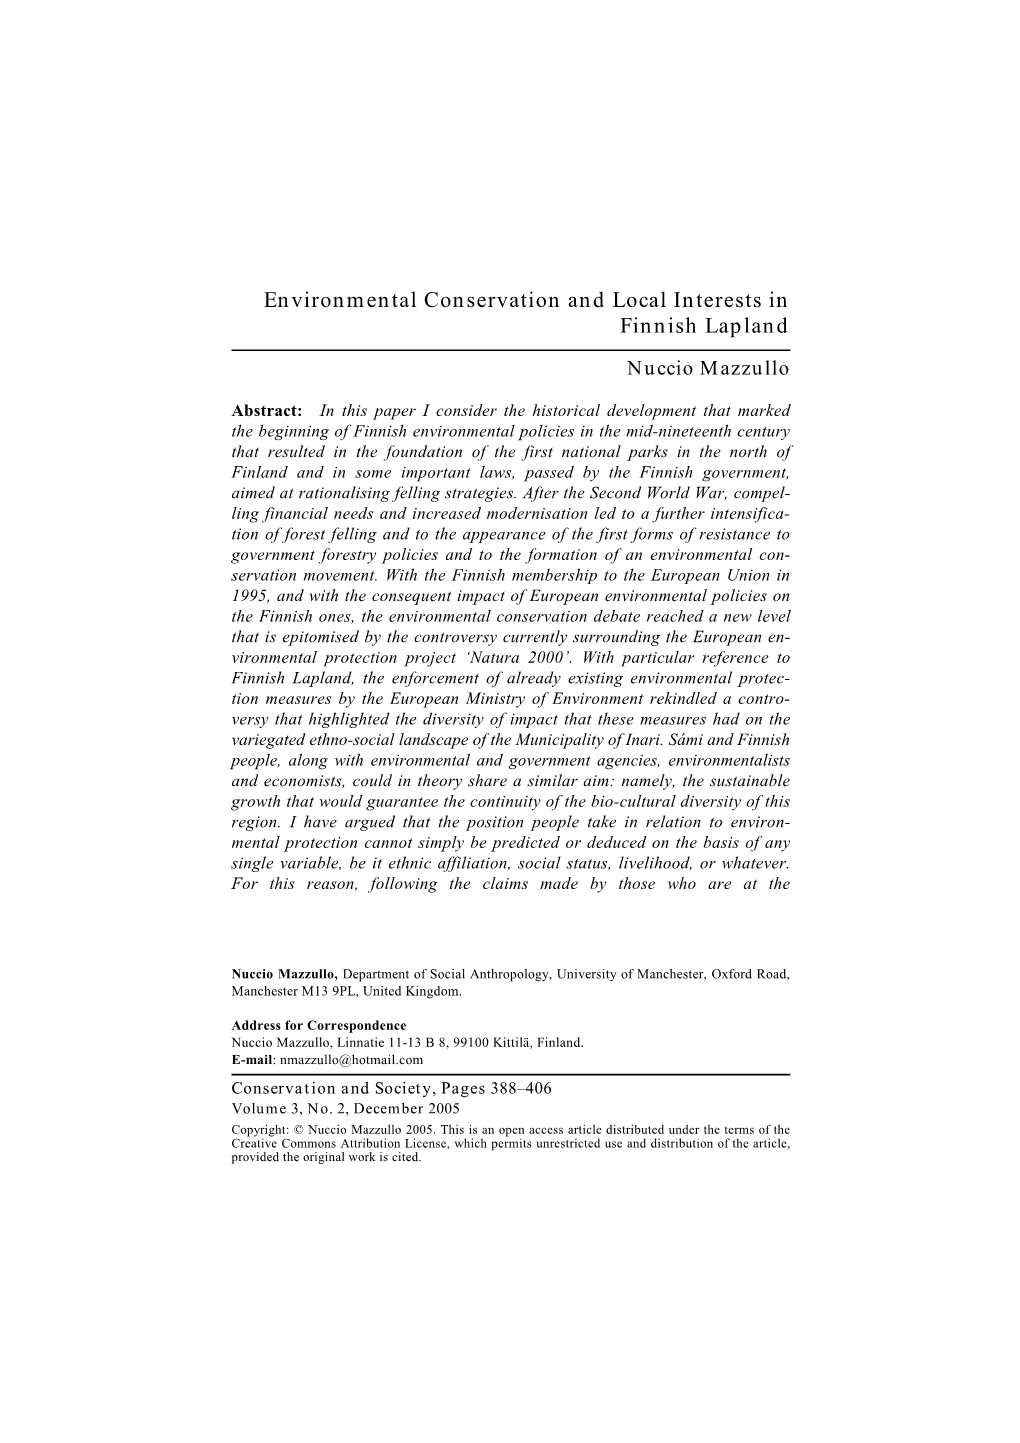 Environmental Conservation and Local Interests in Finnish Lapland